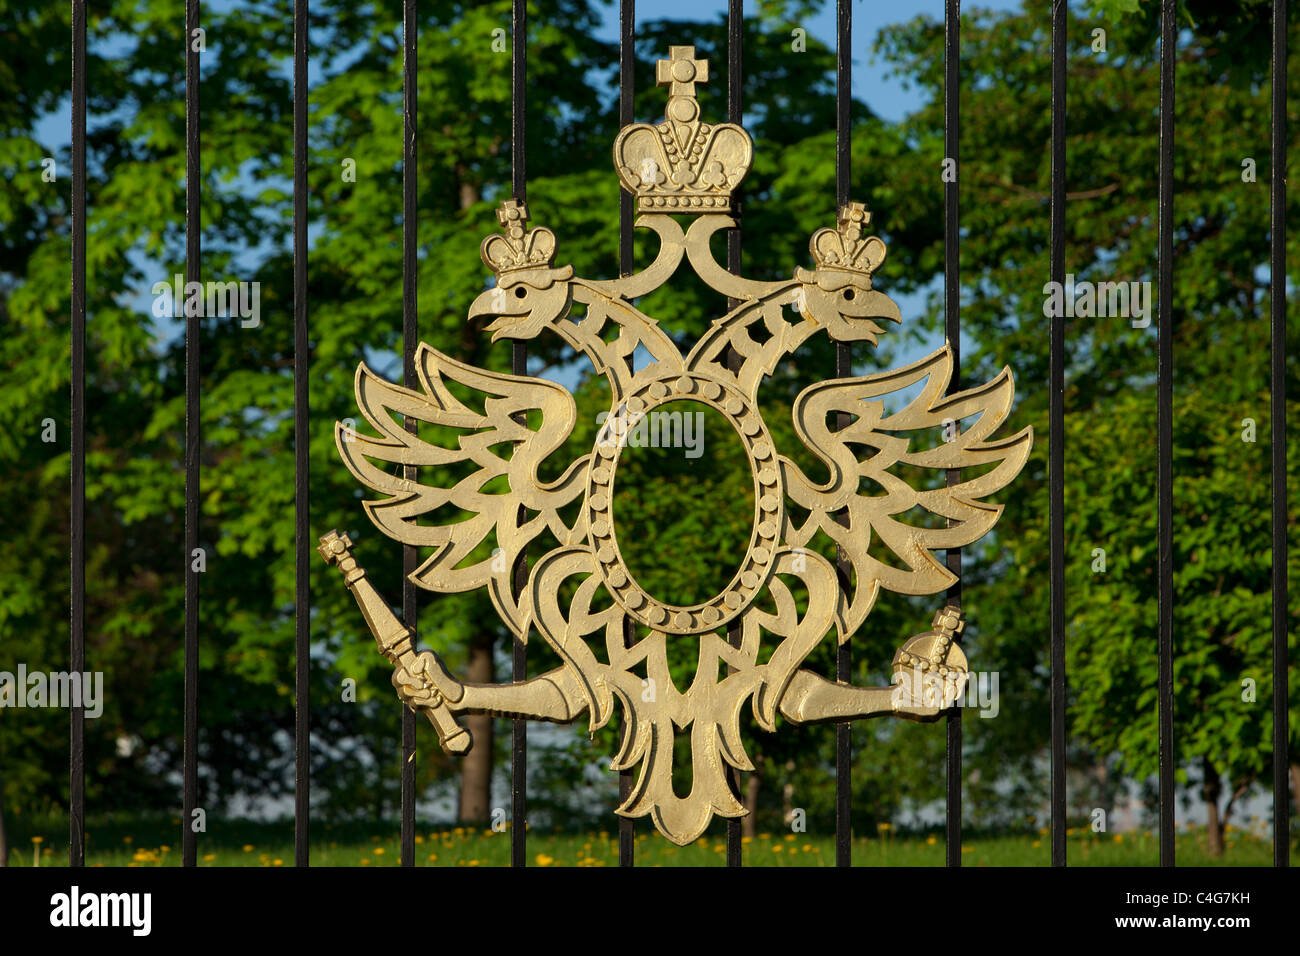 The coat of arms of Russia on the fence of the 18th century Neo-Gothic (Gothic Revival) Tsaritsyno Palace in Moscow, Russia Stock Photo